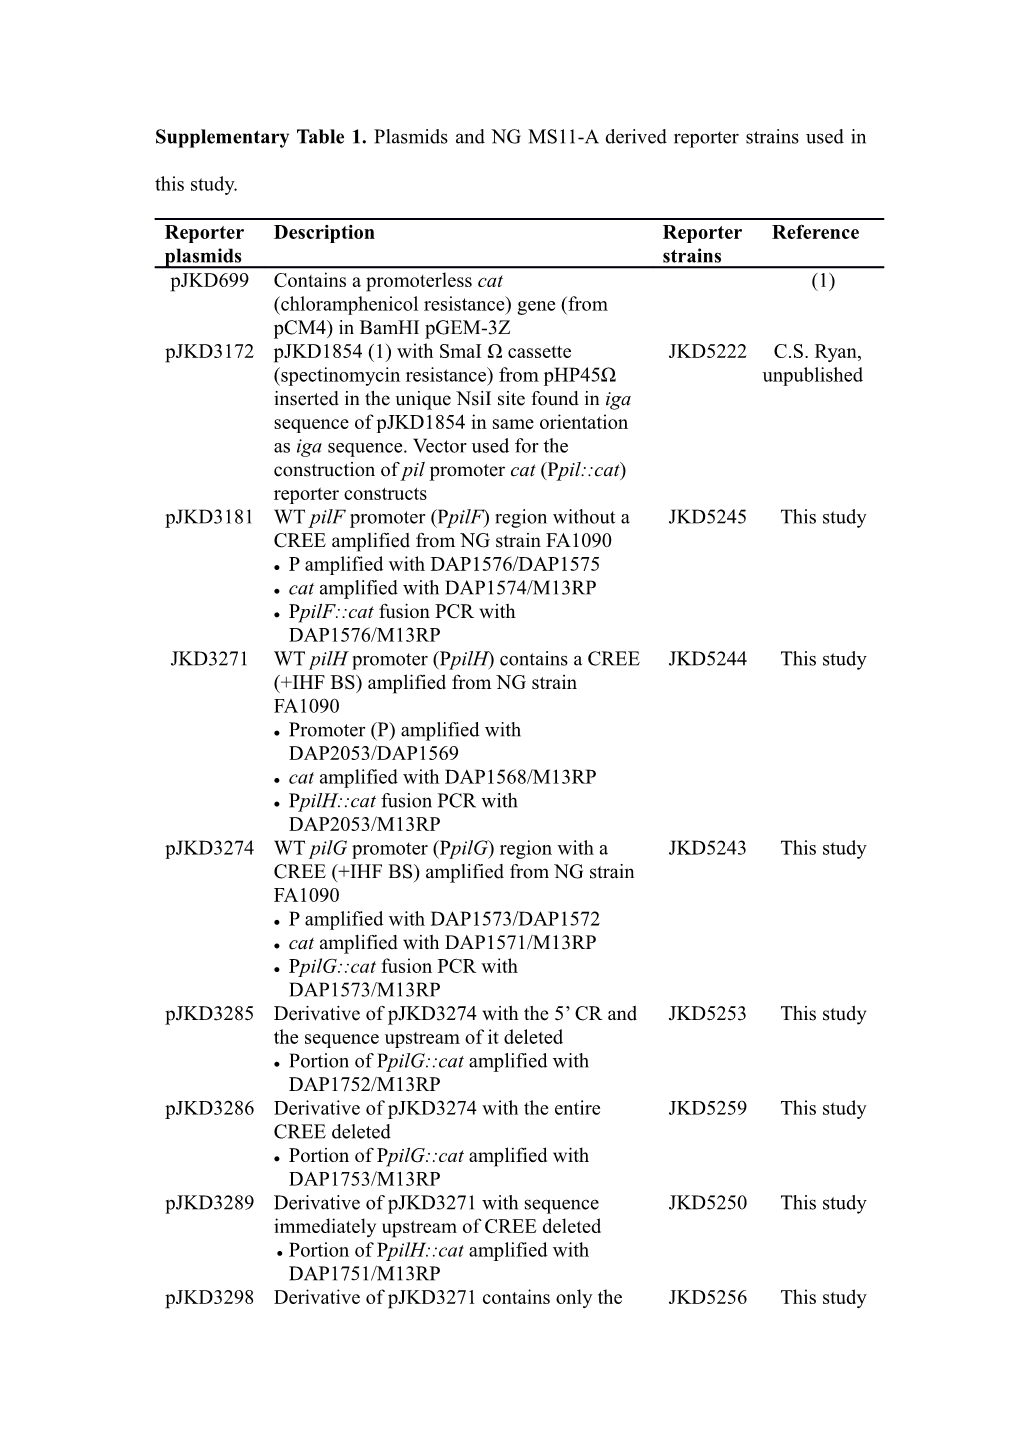 Supplementary Table 1. Plasmids and NG MS11-A Derived Reporter Strains Used in This Study